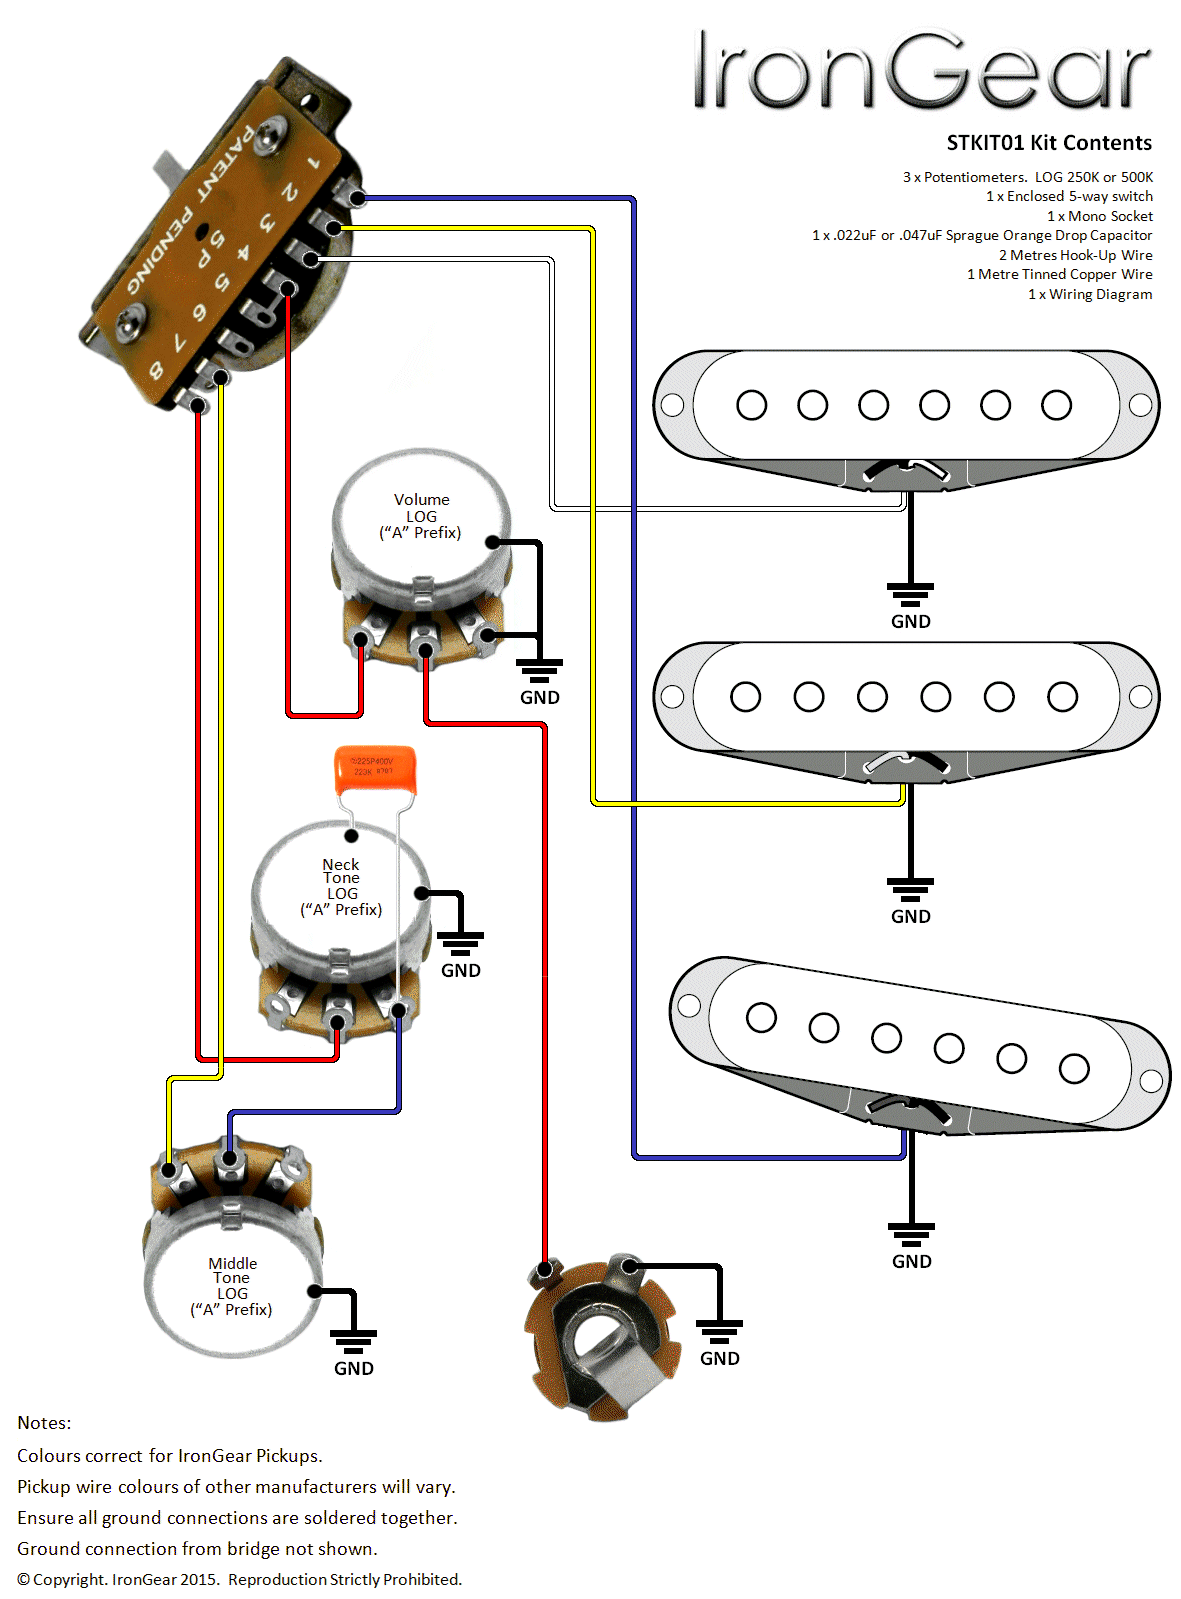 Diagram Fender Squier Wiring Diagram Picture Schematic Full Version Hd Quality Picture Schematic Ajsewiring Robertaalteri It